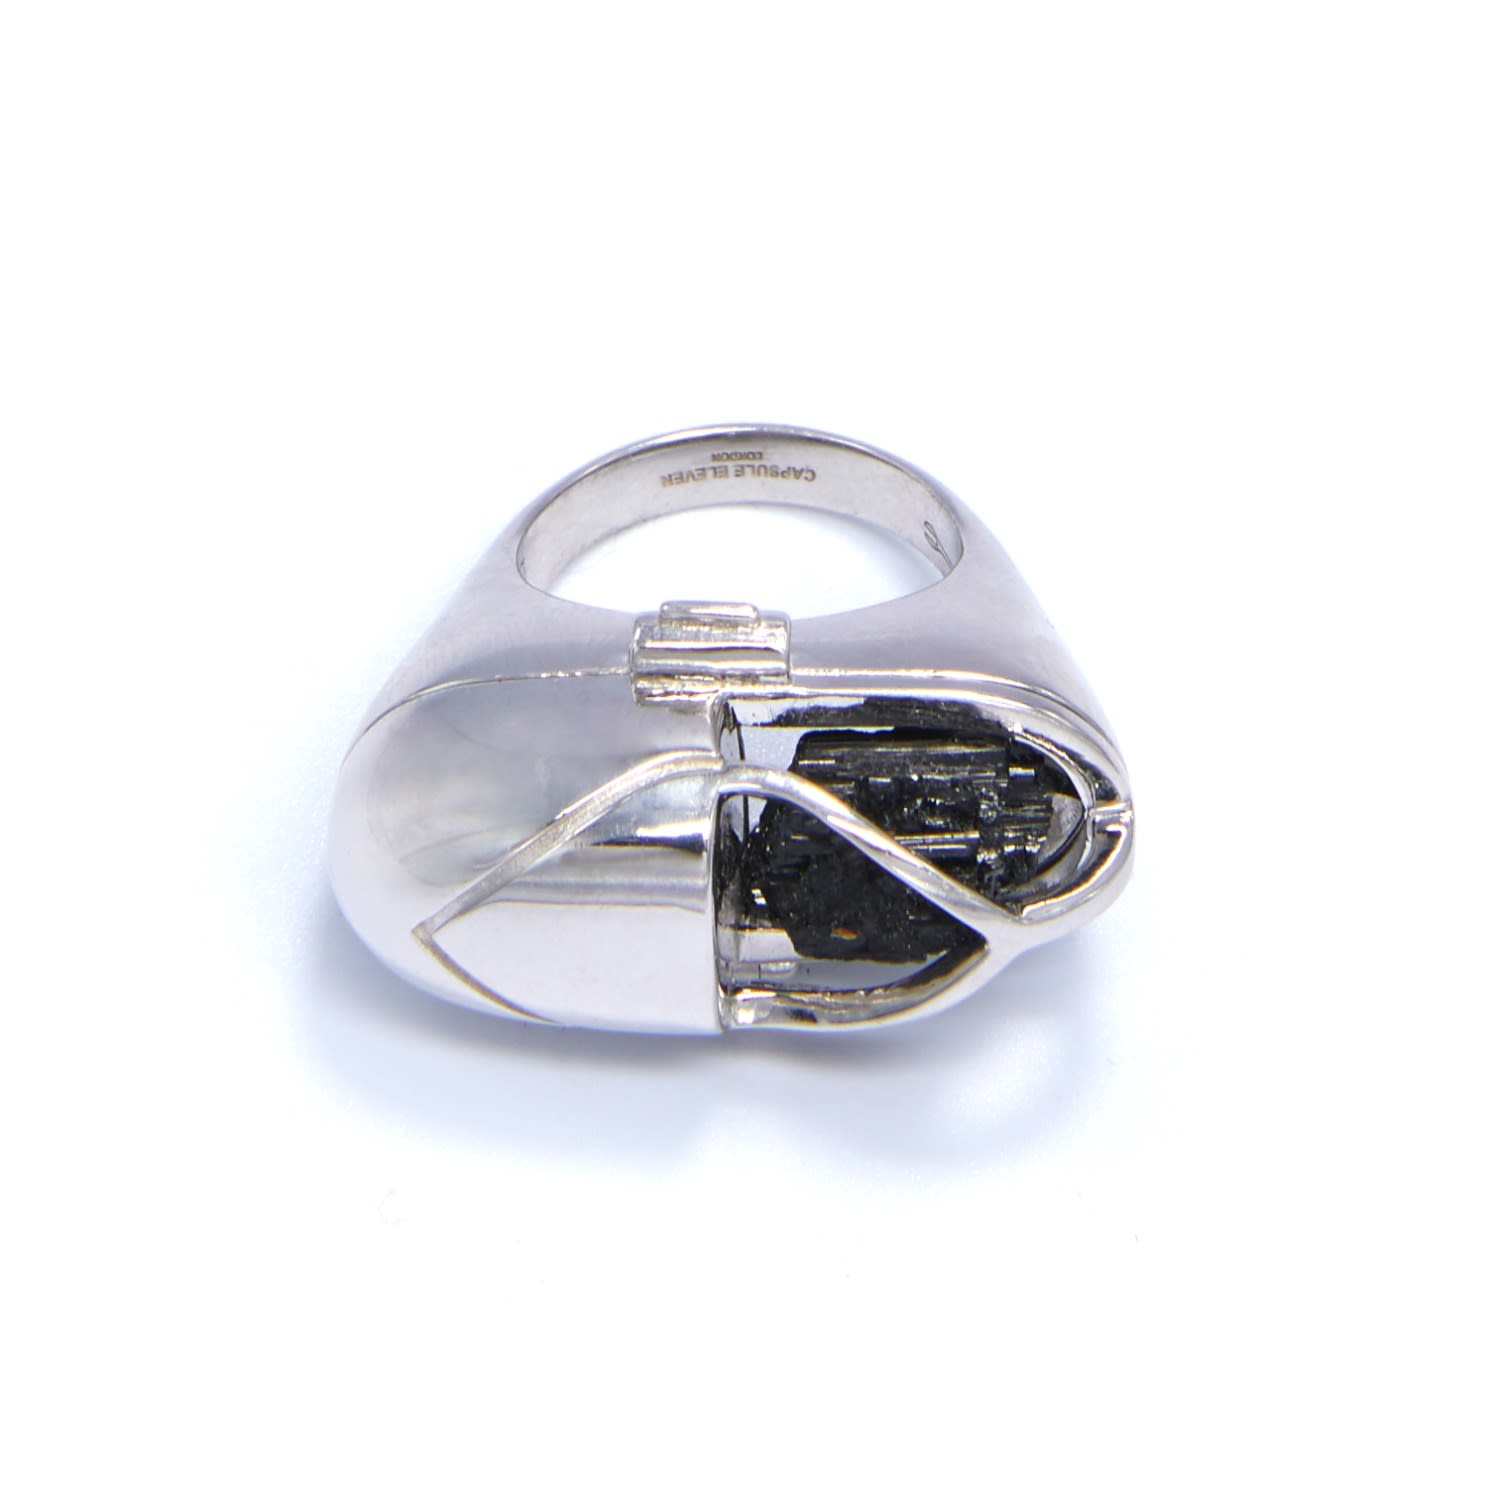 Capsule Eleven Women's Capsule Crystal Ring - Sterling Silver - Black Tourmaline In White